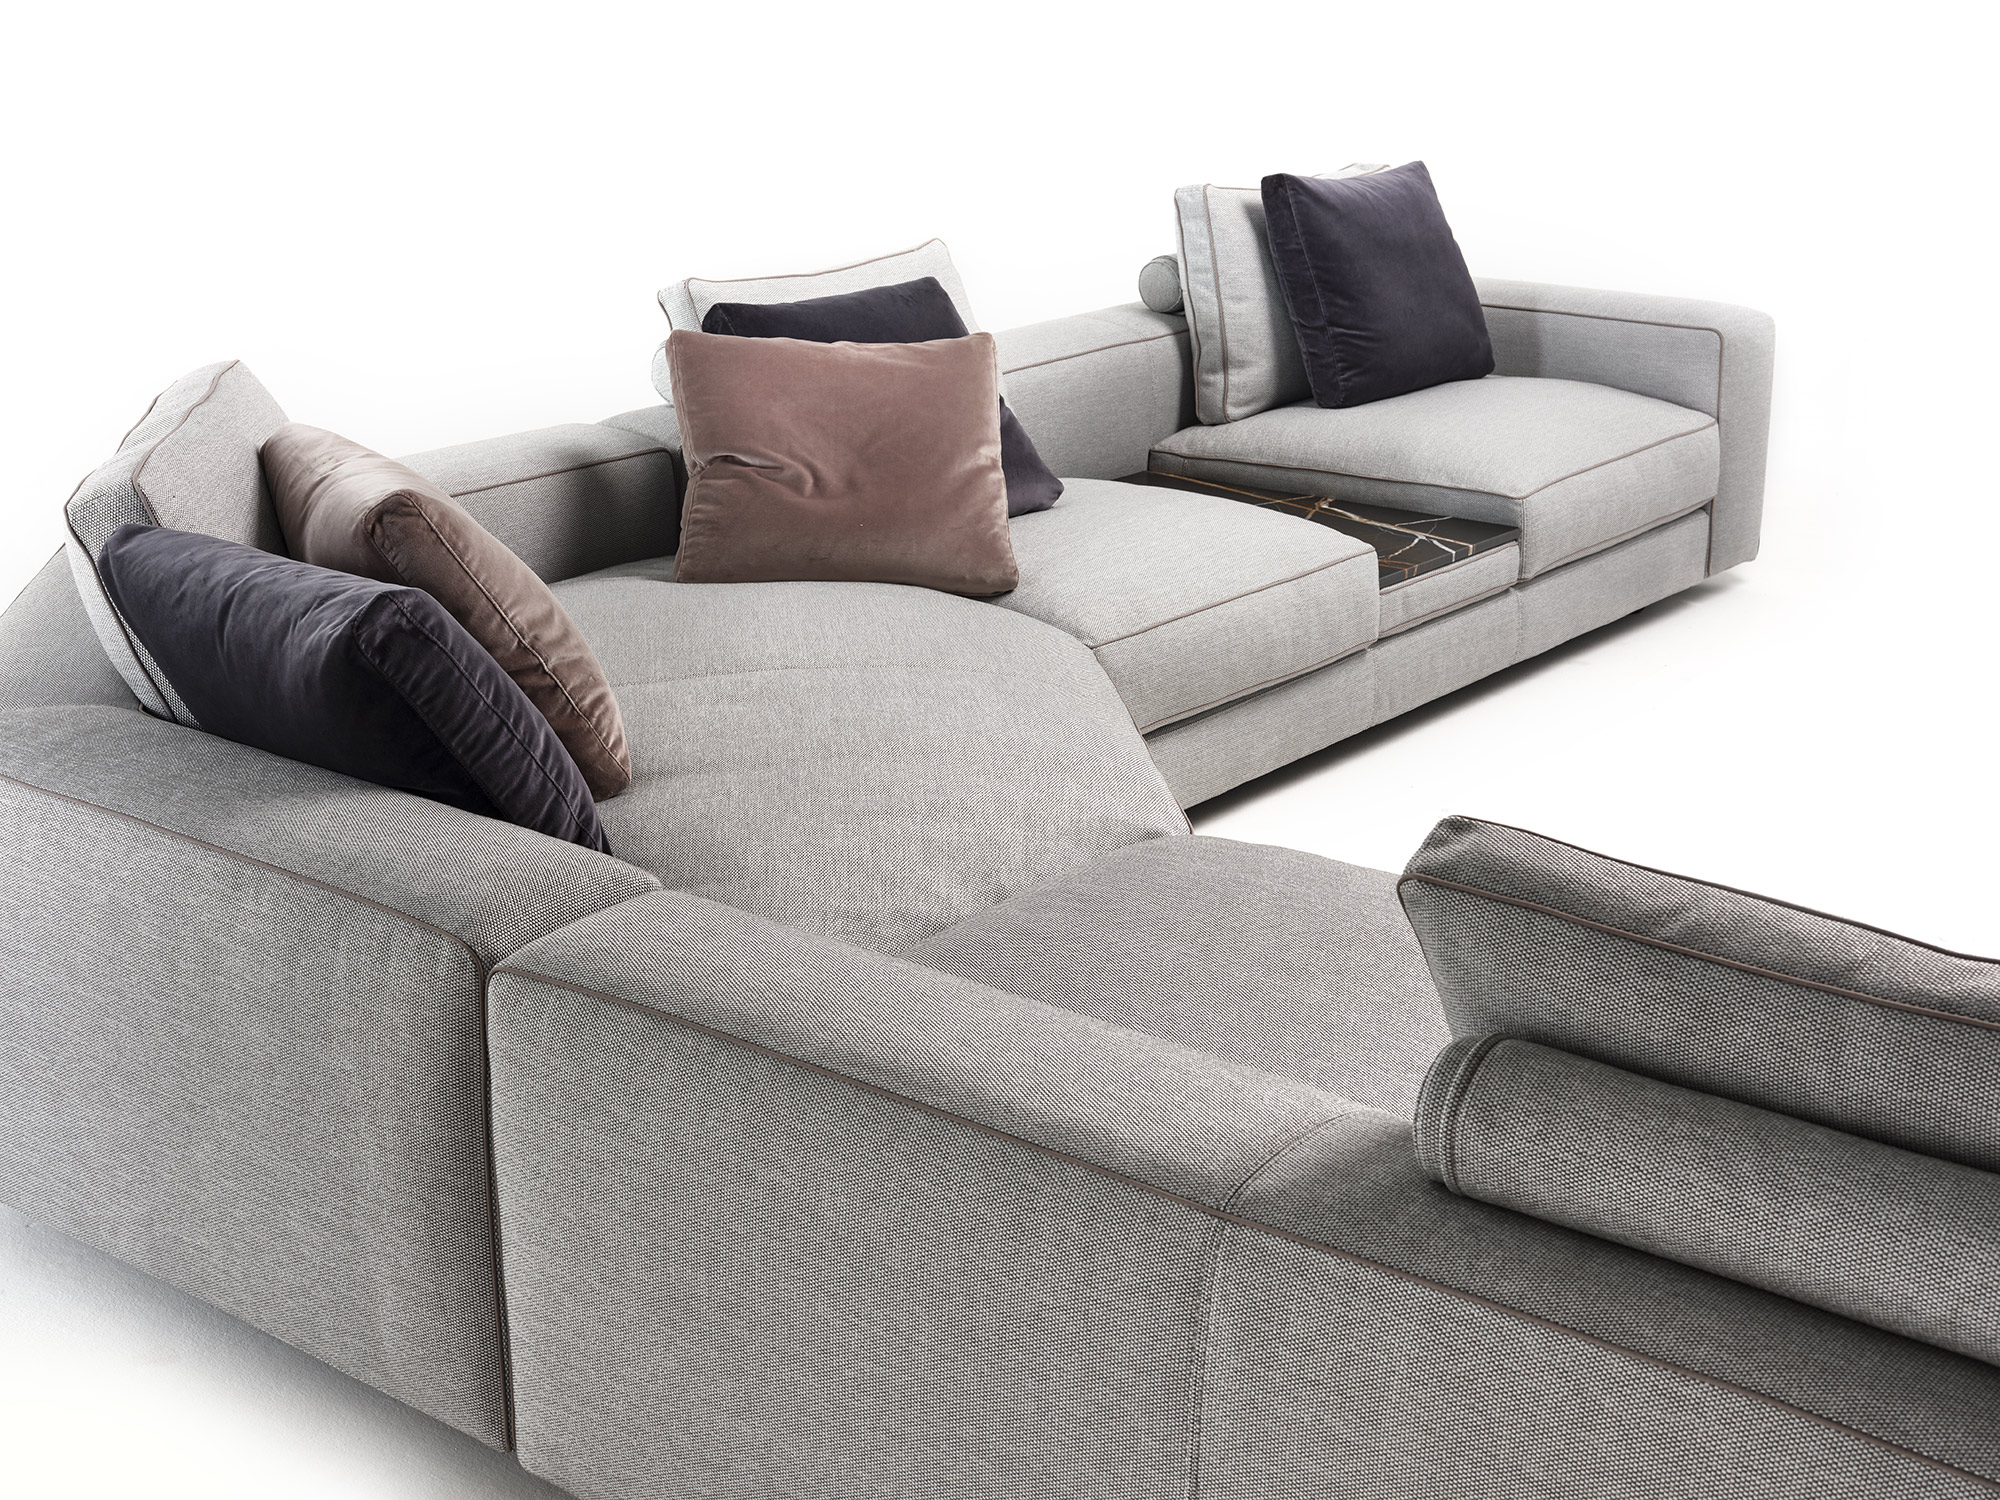 Mussi Sinfonia sectional sofa back